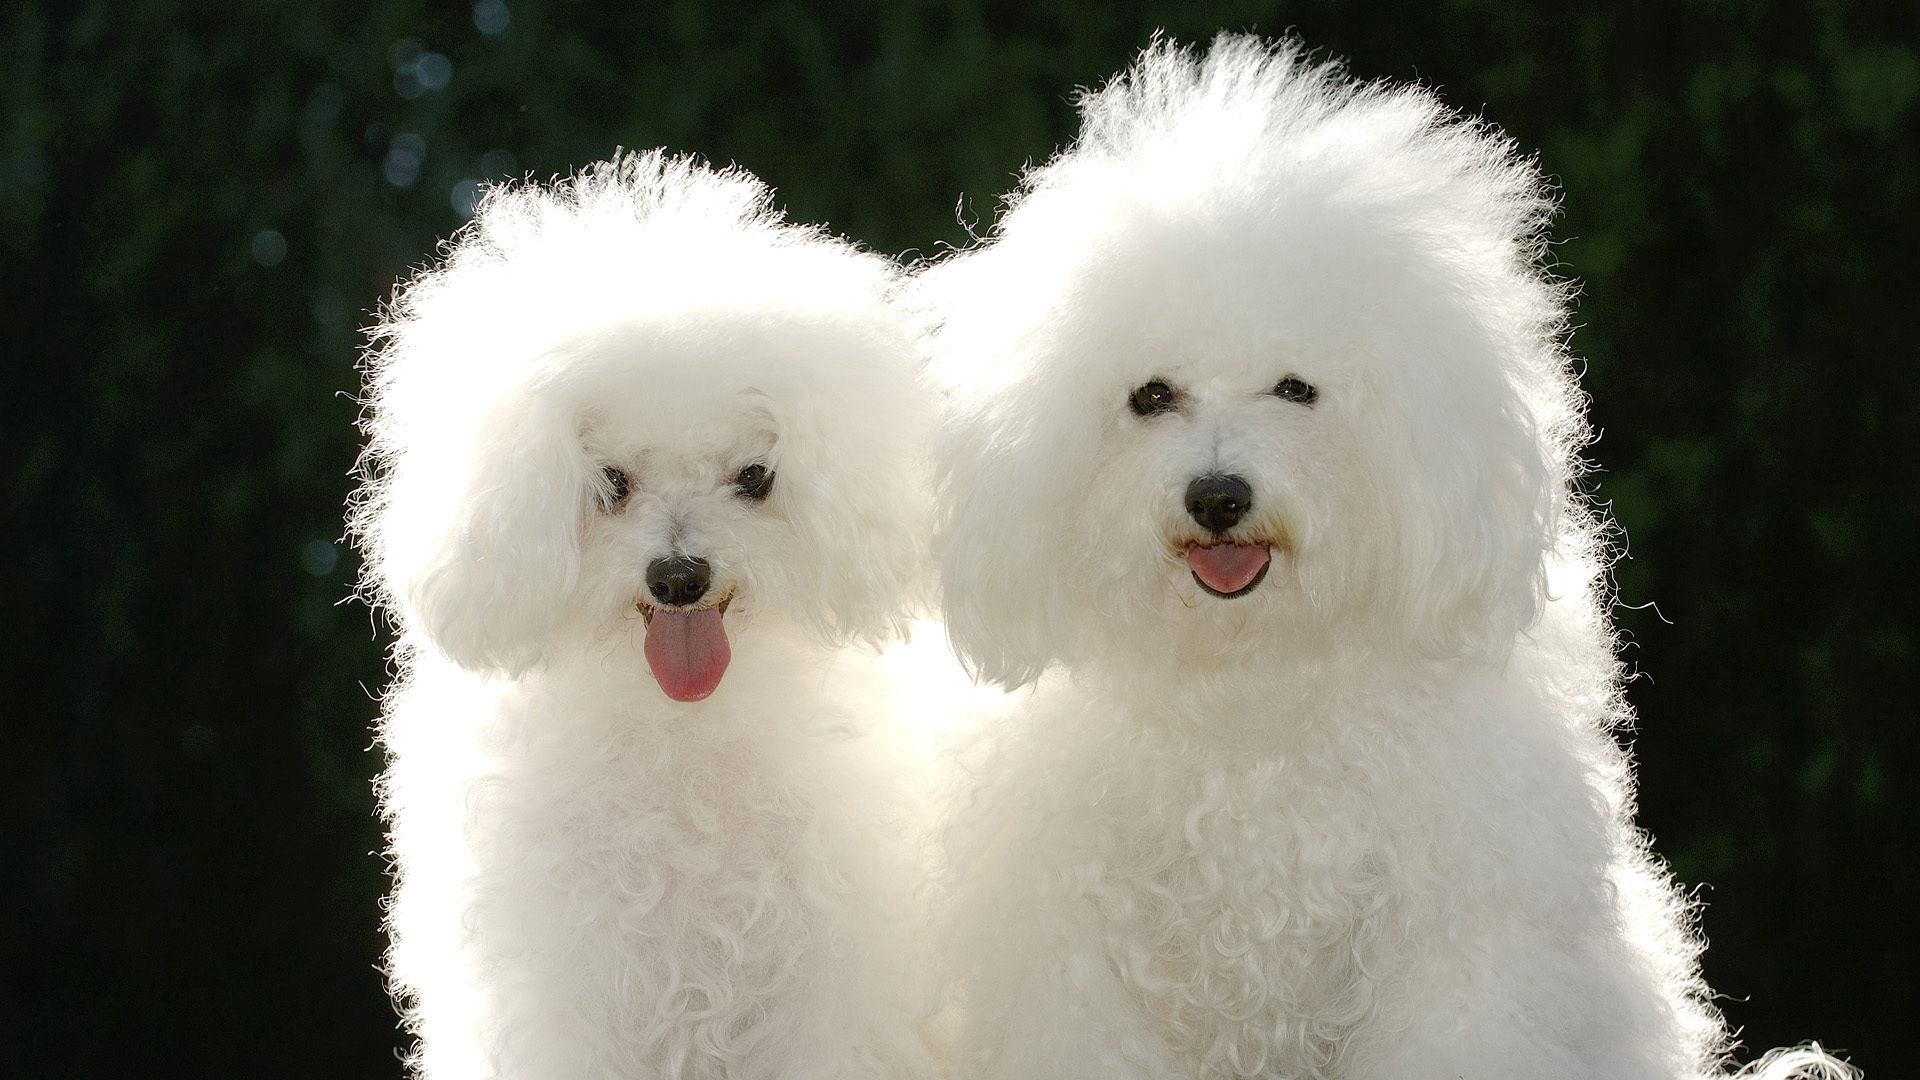 Mobile wallpaper: Animals, Poodle, Shadow, Pair, Couple, Dogs, 107063  download the picture for free.